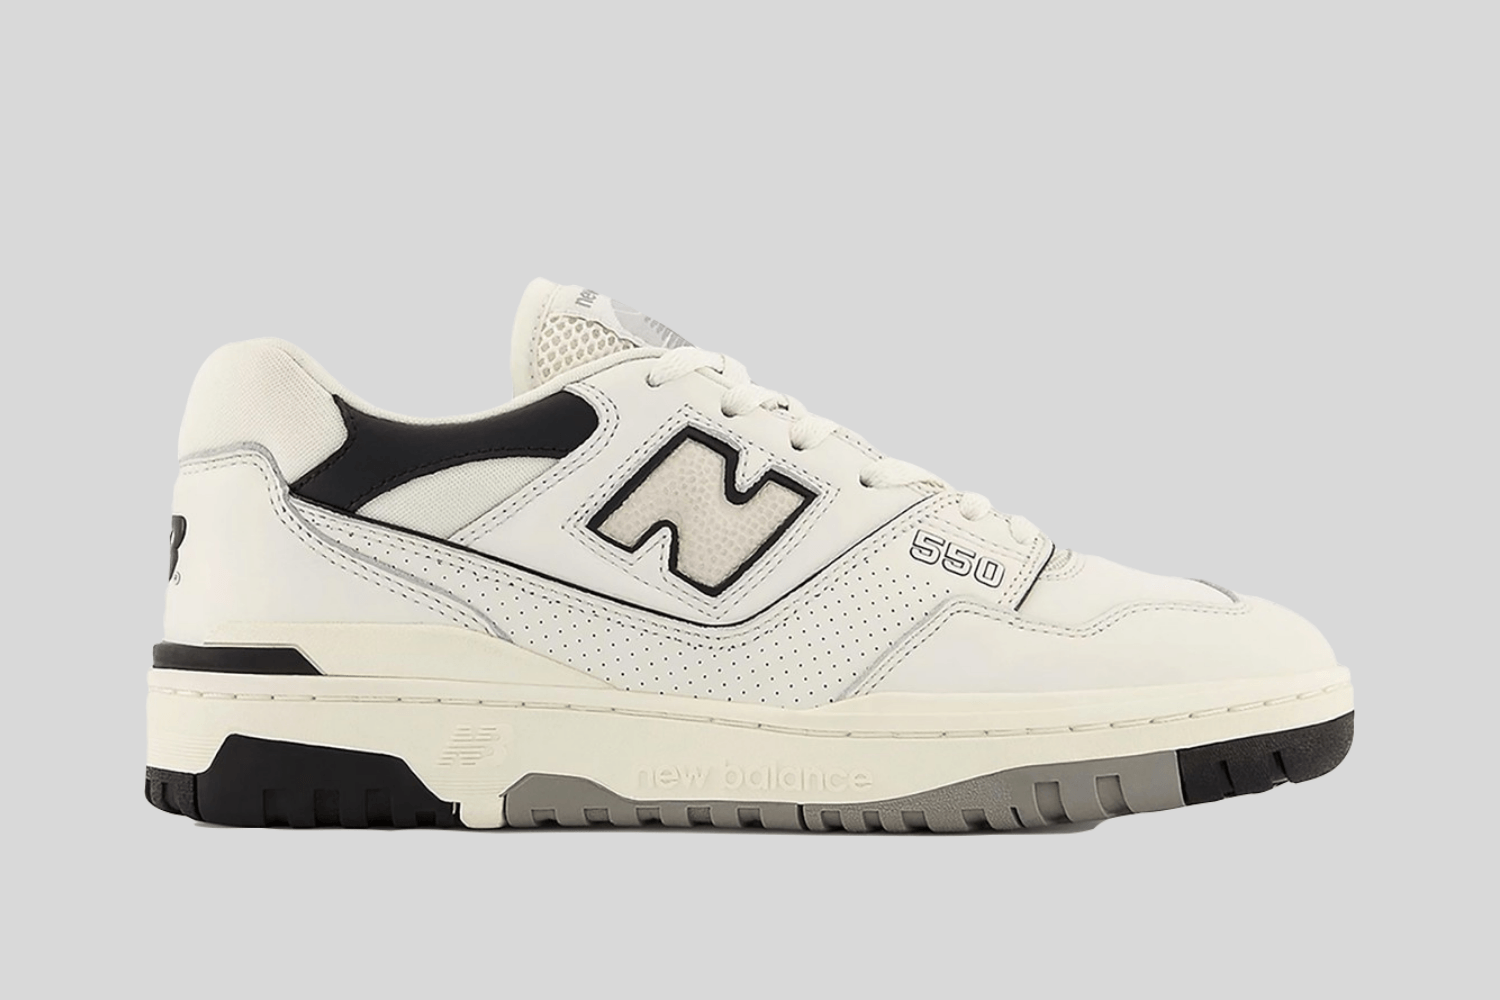 The New Balance 550 will drop in a 'Cream Black' colorway